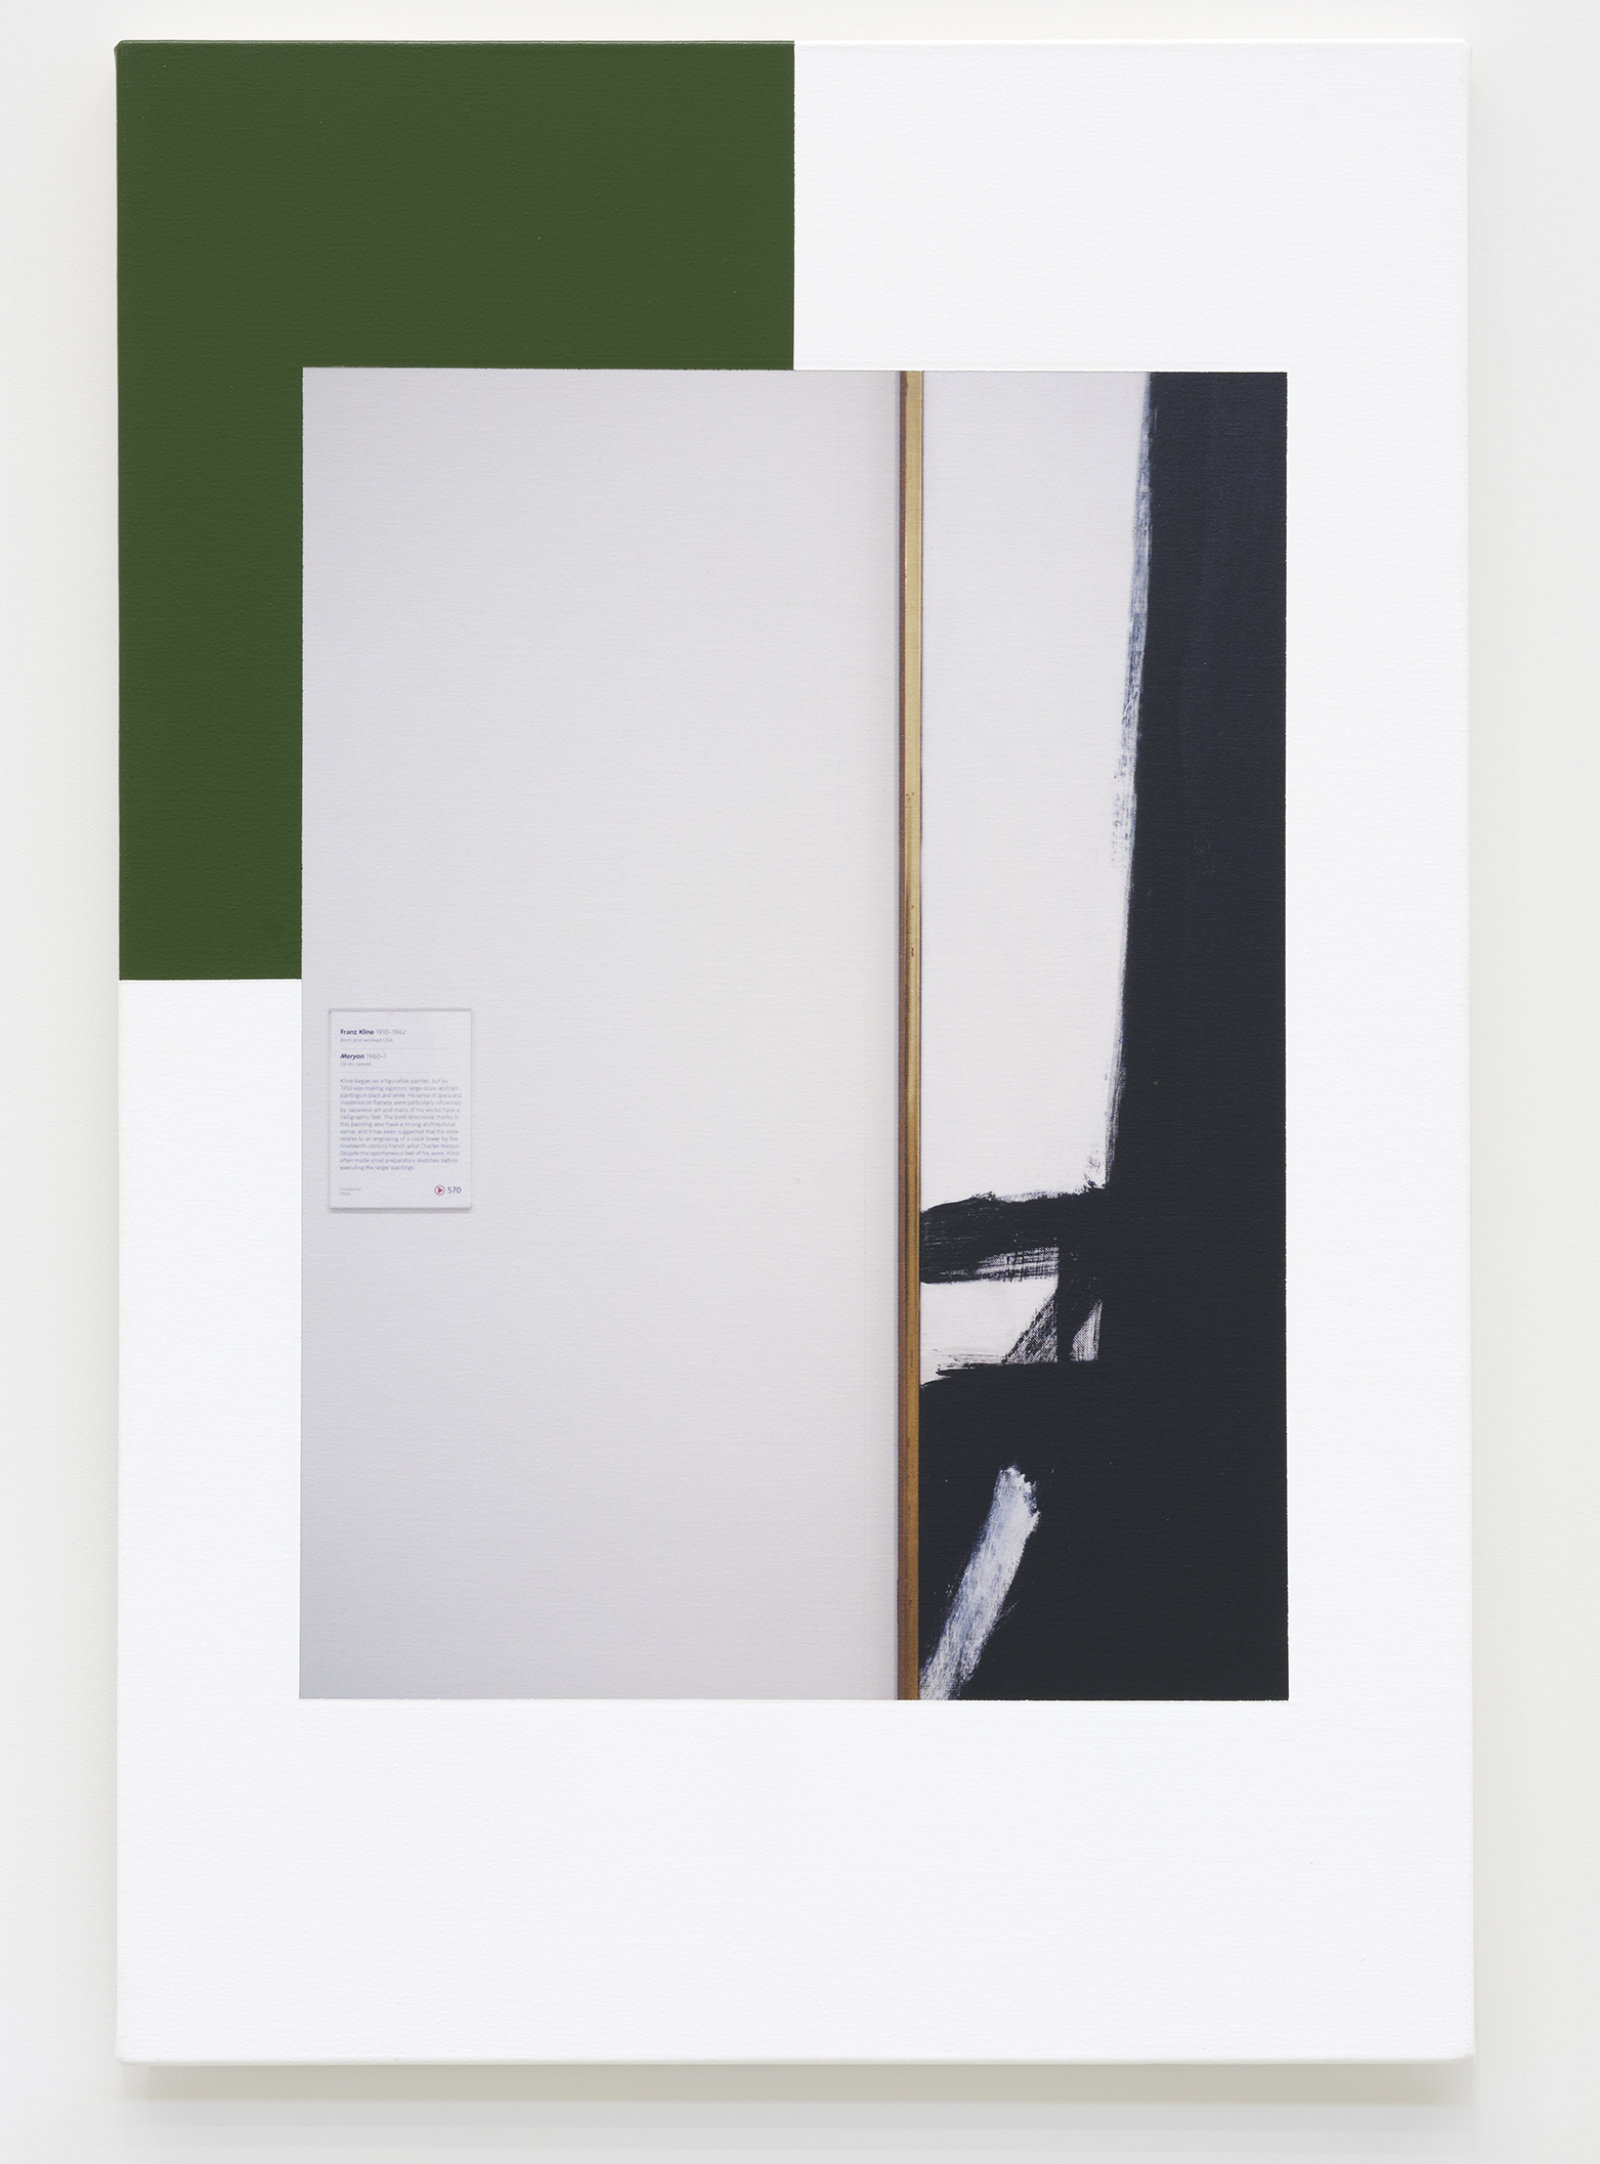 Ian Wallace, Abstract Composition (with Franz Kline), 2012, photolaminate with acrylic on canvas, 36 x 24 in. (91 x 61 cm)